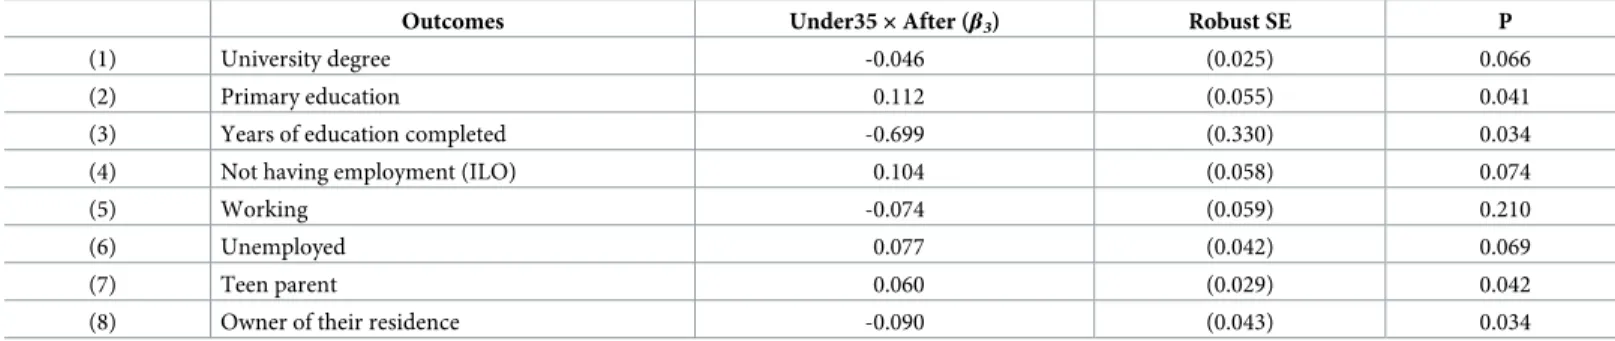 Table 1 shows the estimated effects (β 3 coefficients) on the eight socioeconomic outcomes.